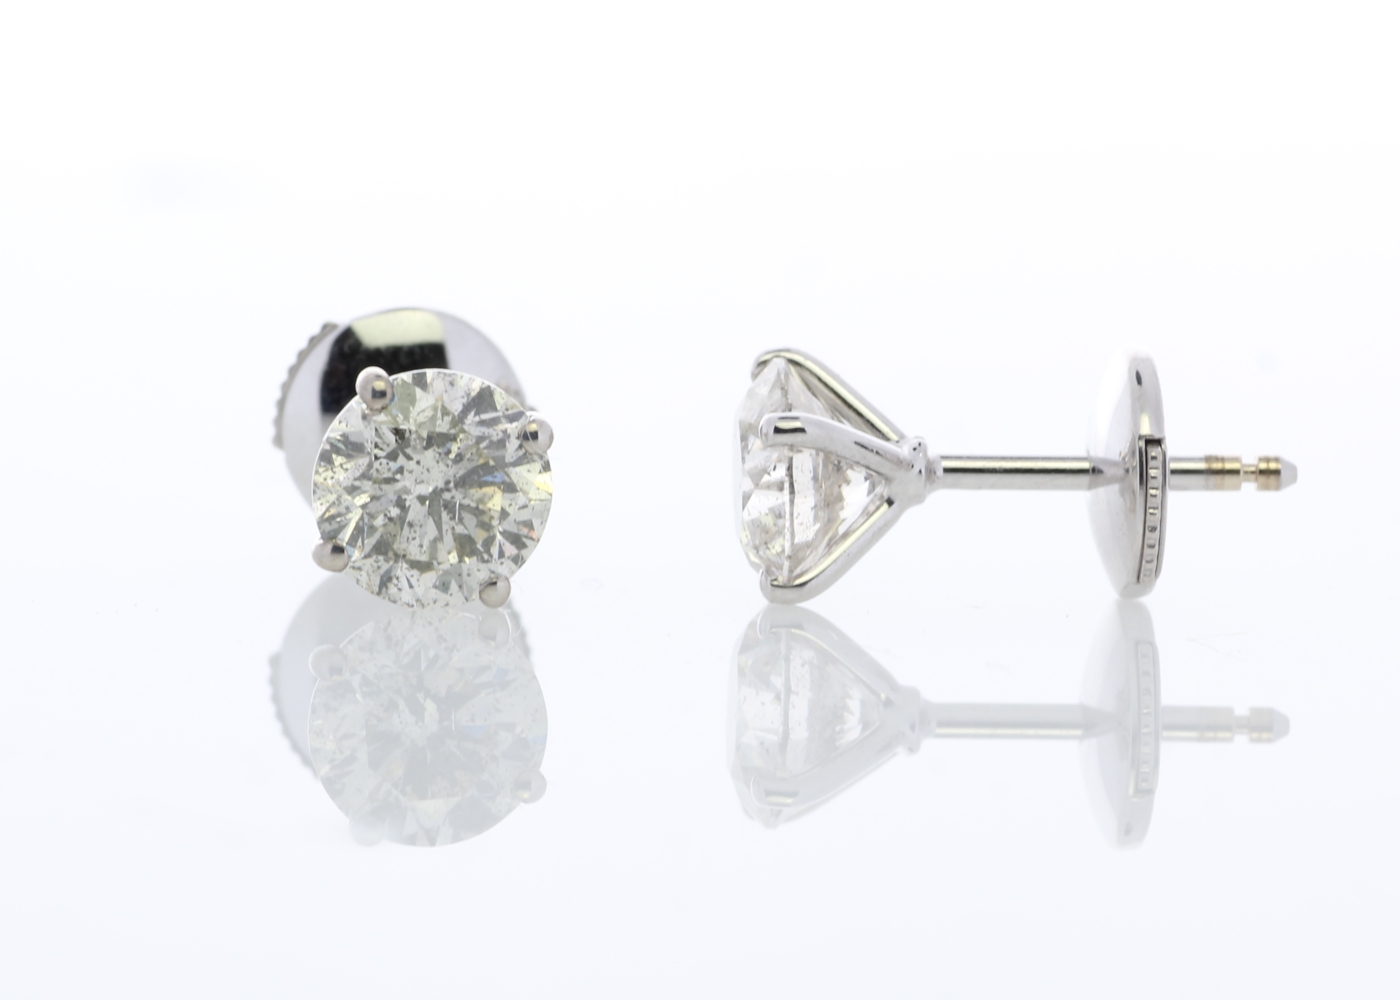 18ct White Gold Claw Set Diamond Earrings 2.34 Carats - Image 2 of 4